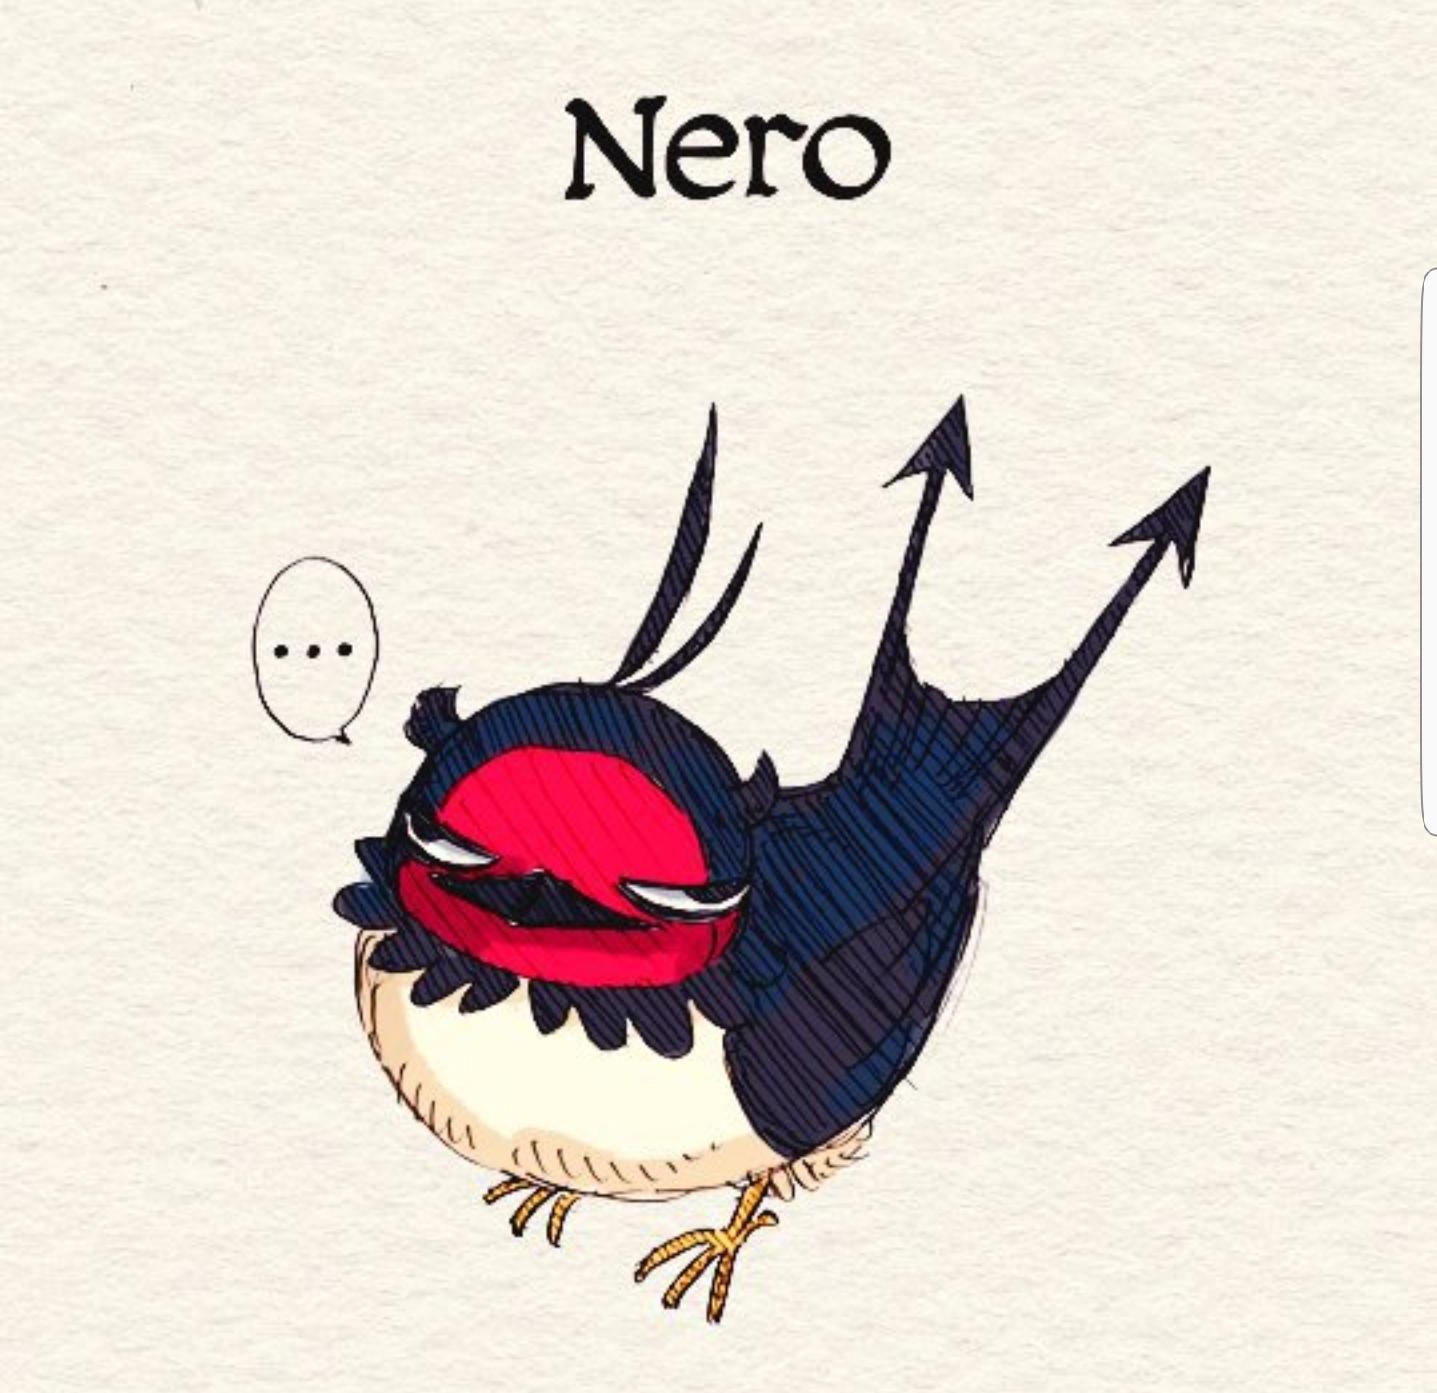 Would anyone be able to 3D model Nero from Black Clover so I